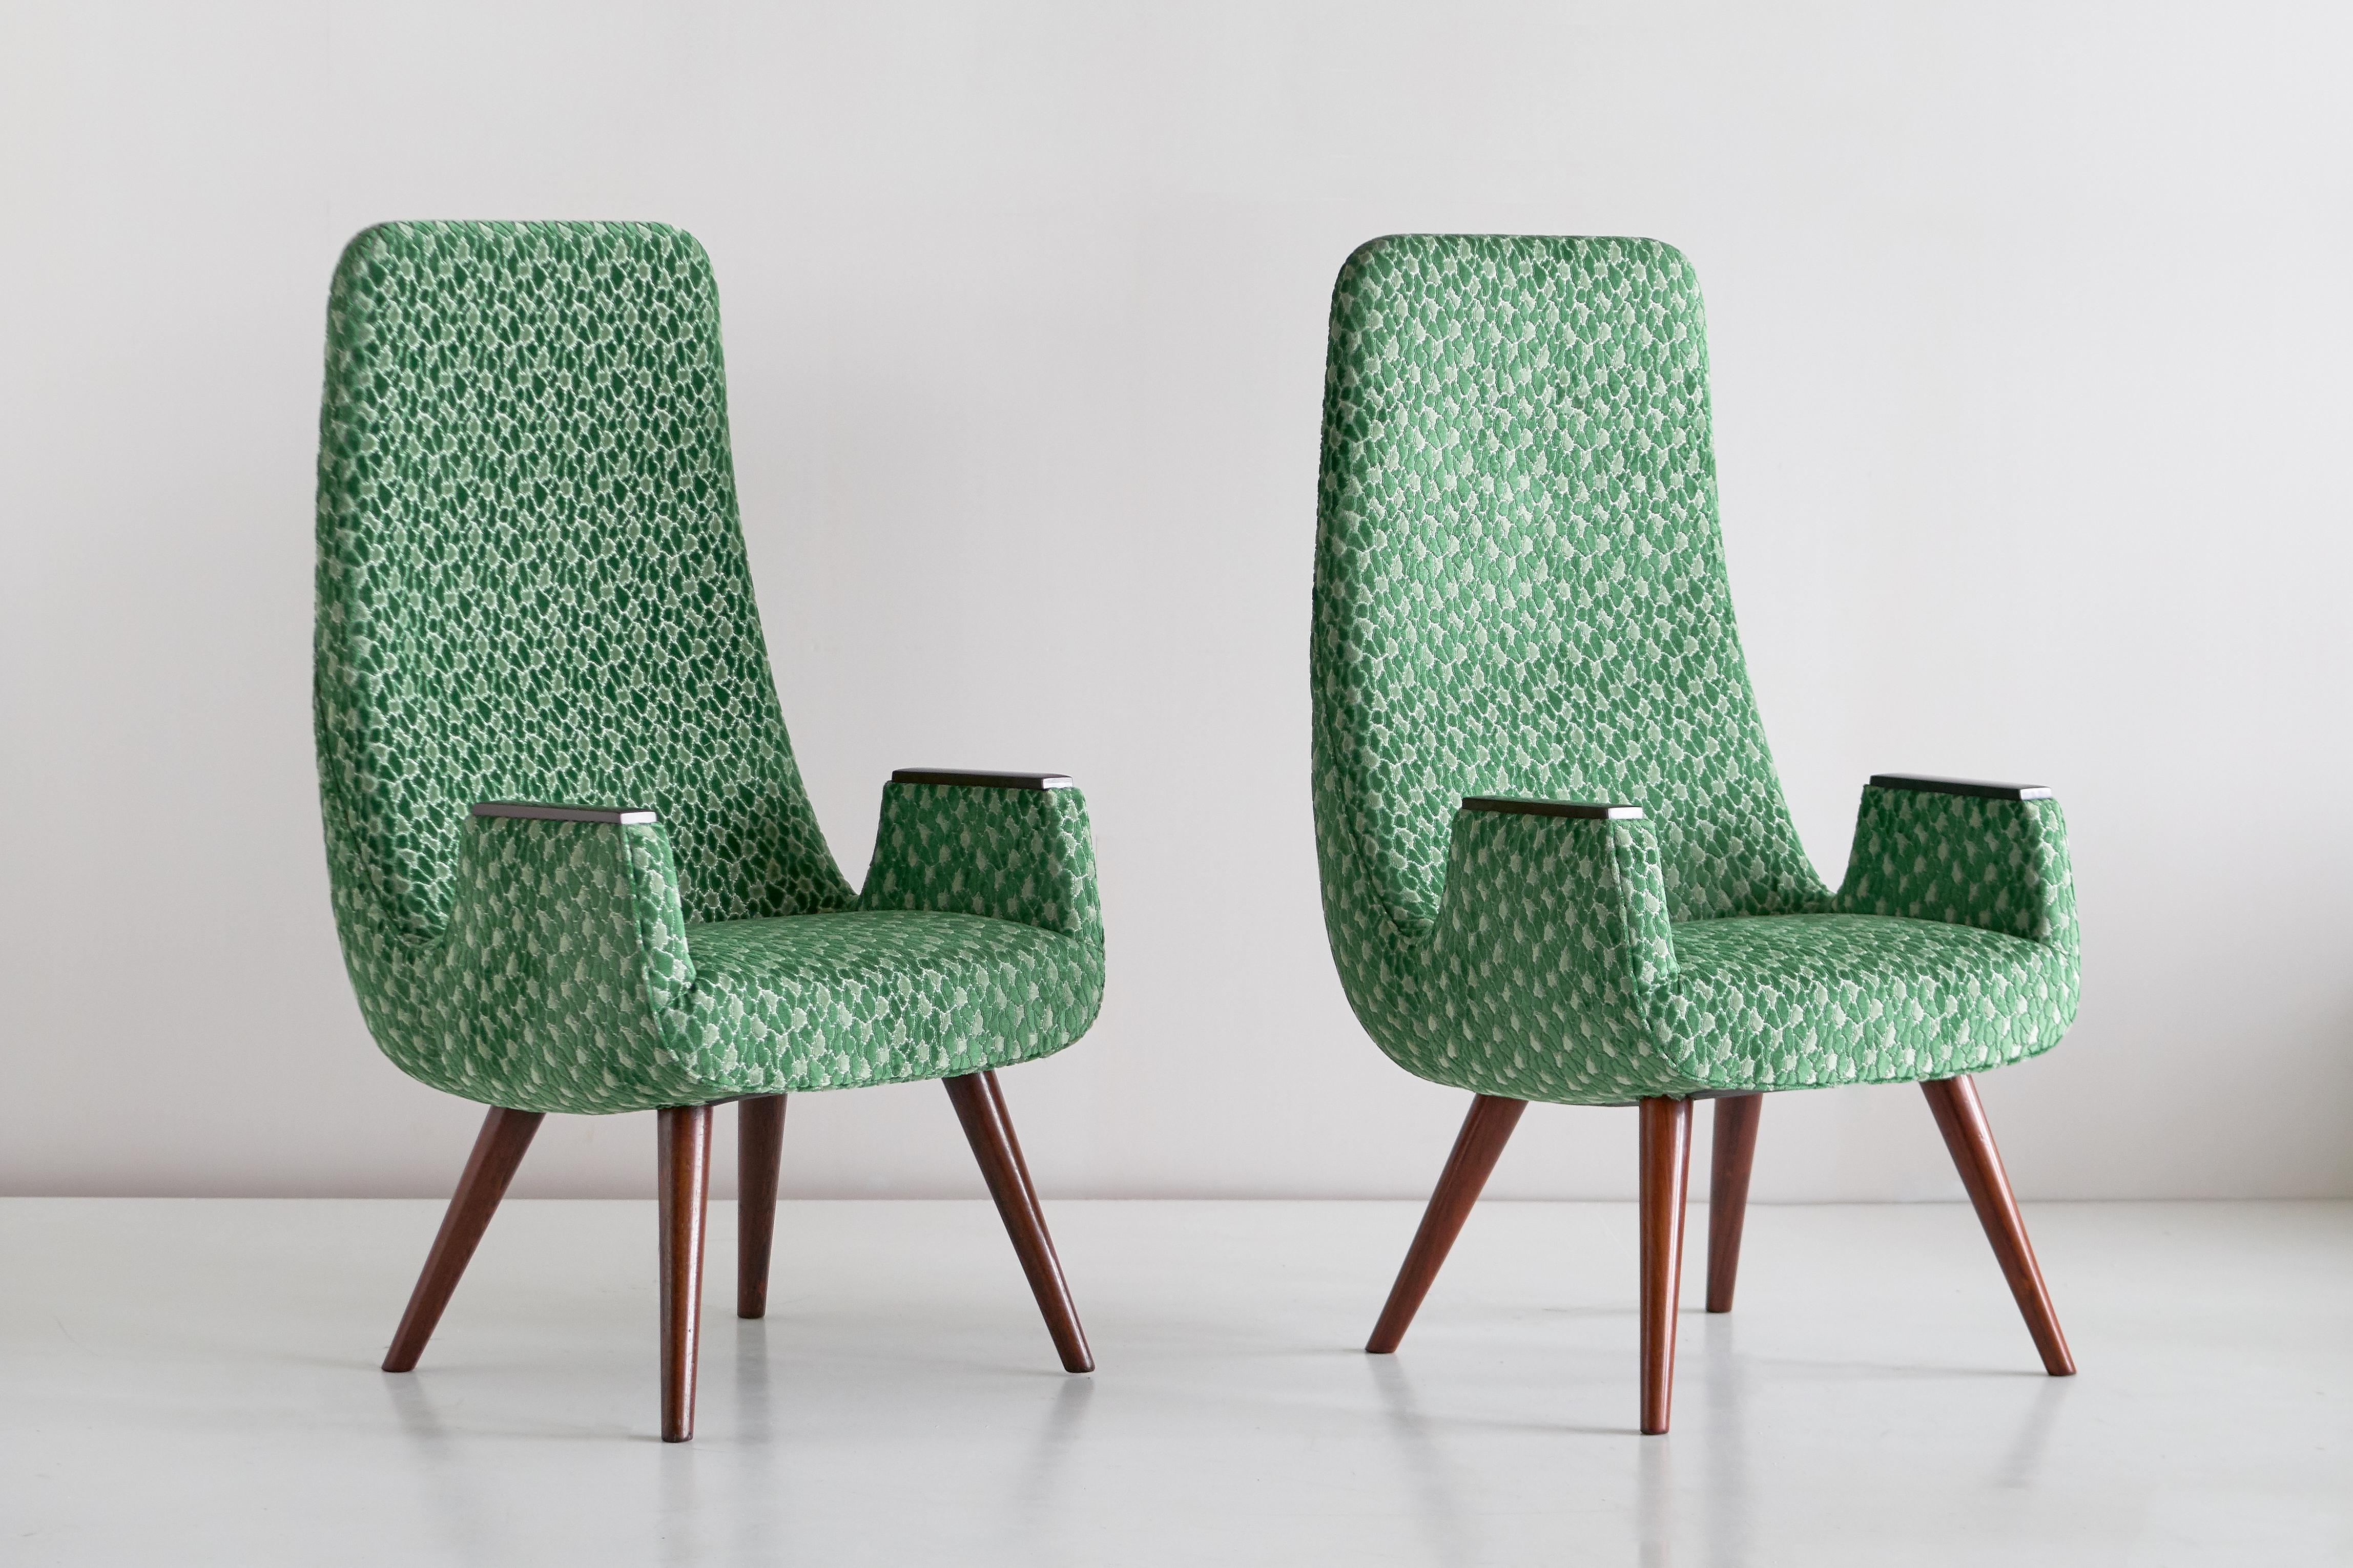 Pair of High Back Armchairs in Green Braquenié Velvet and Wengé Wood, 1950s For Sale 5